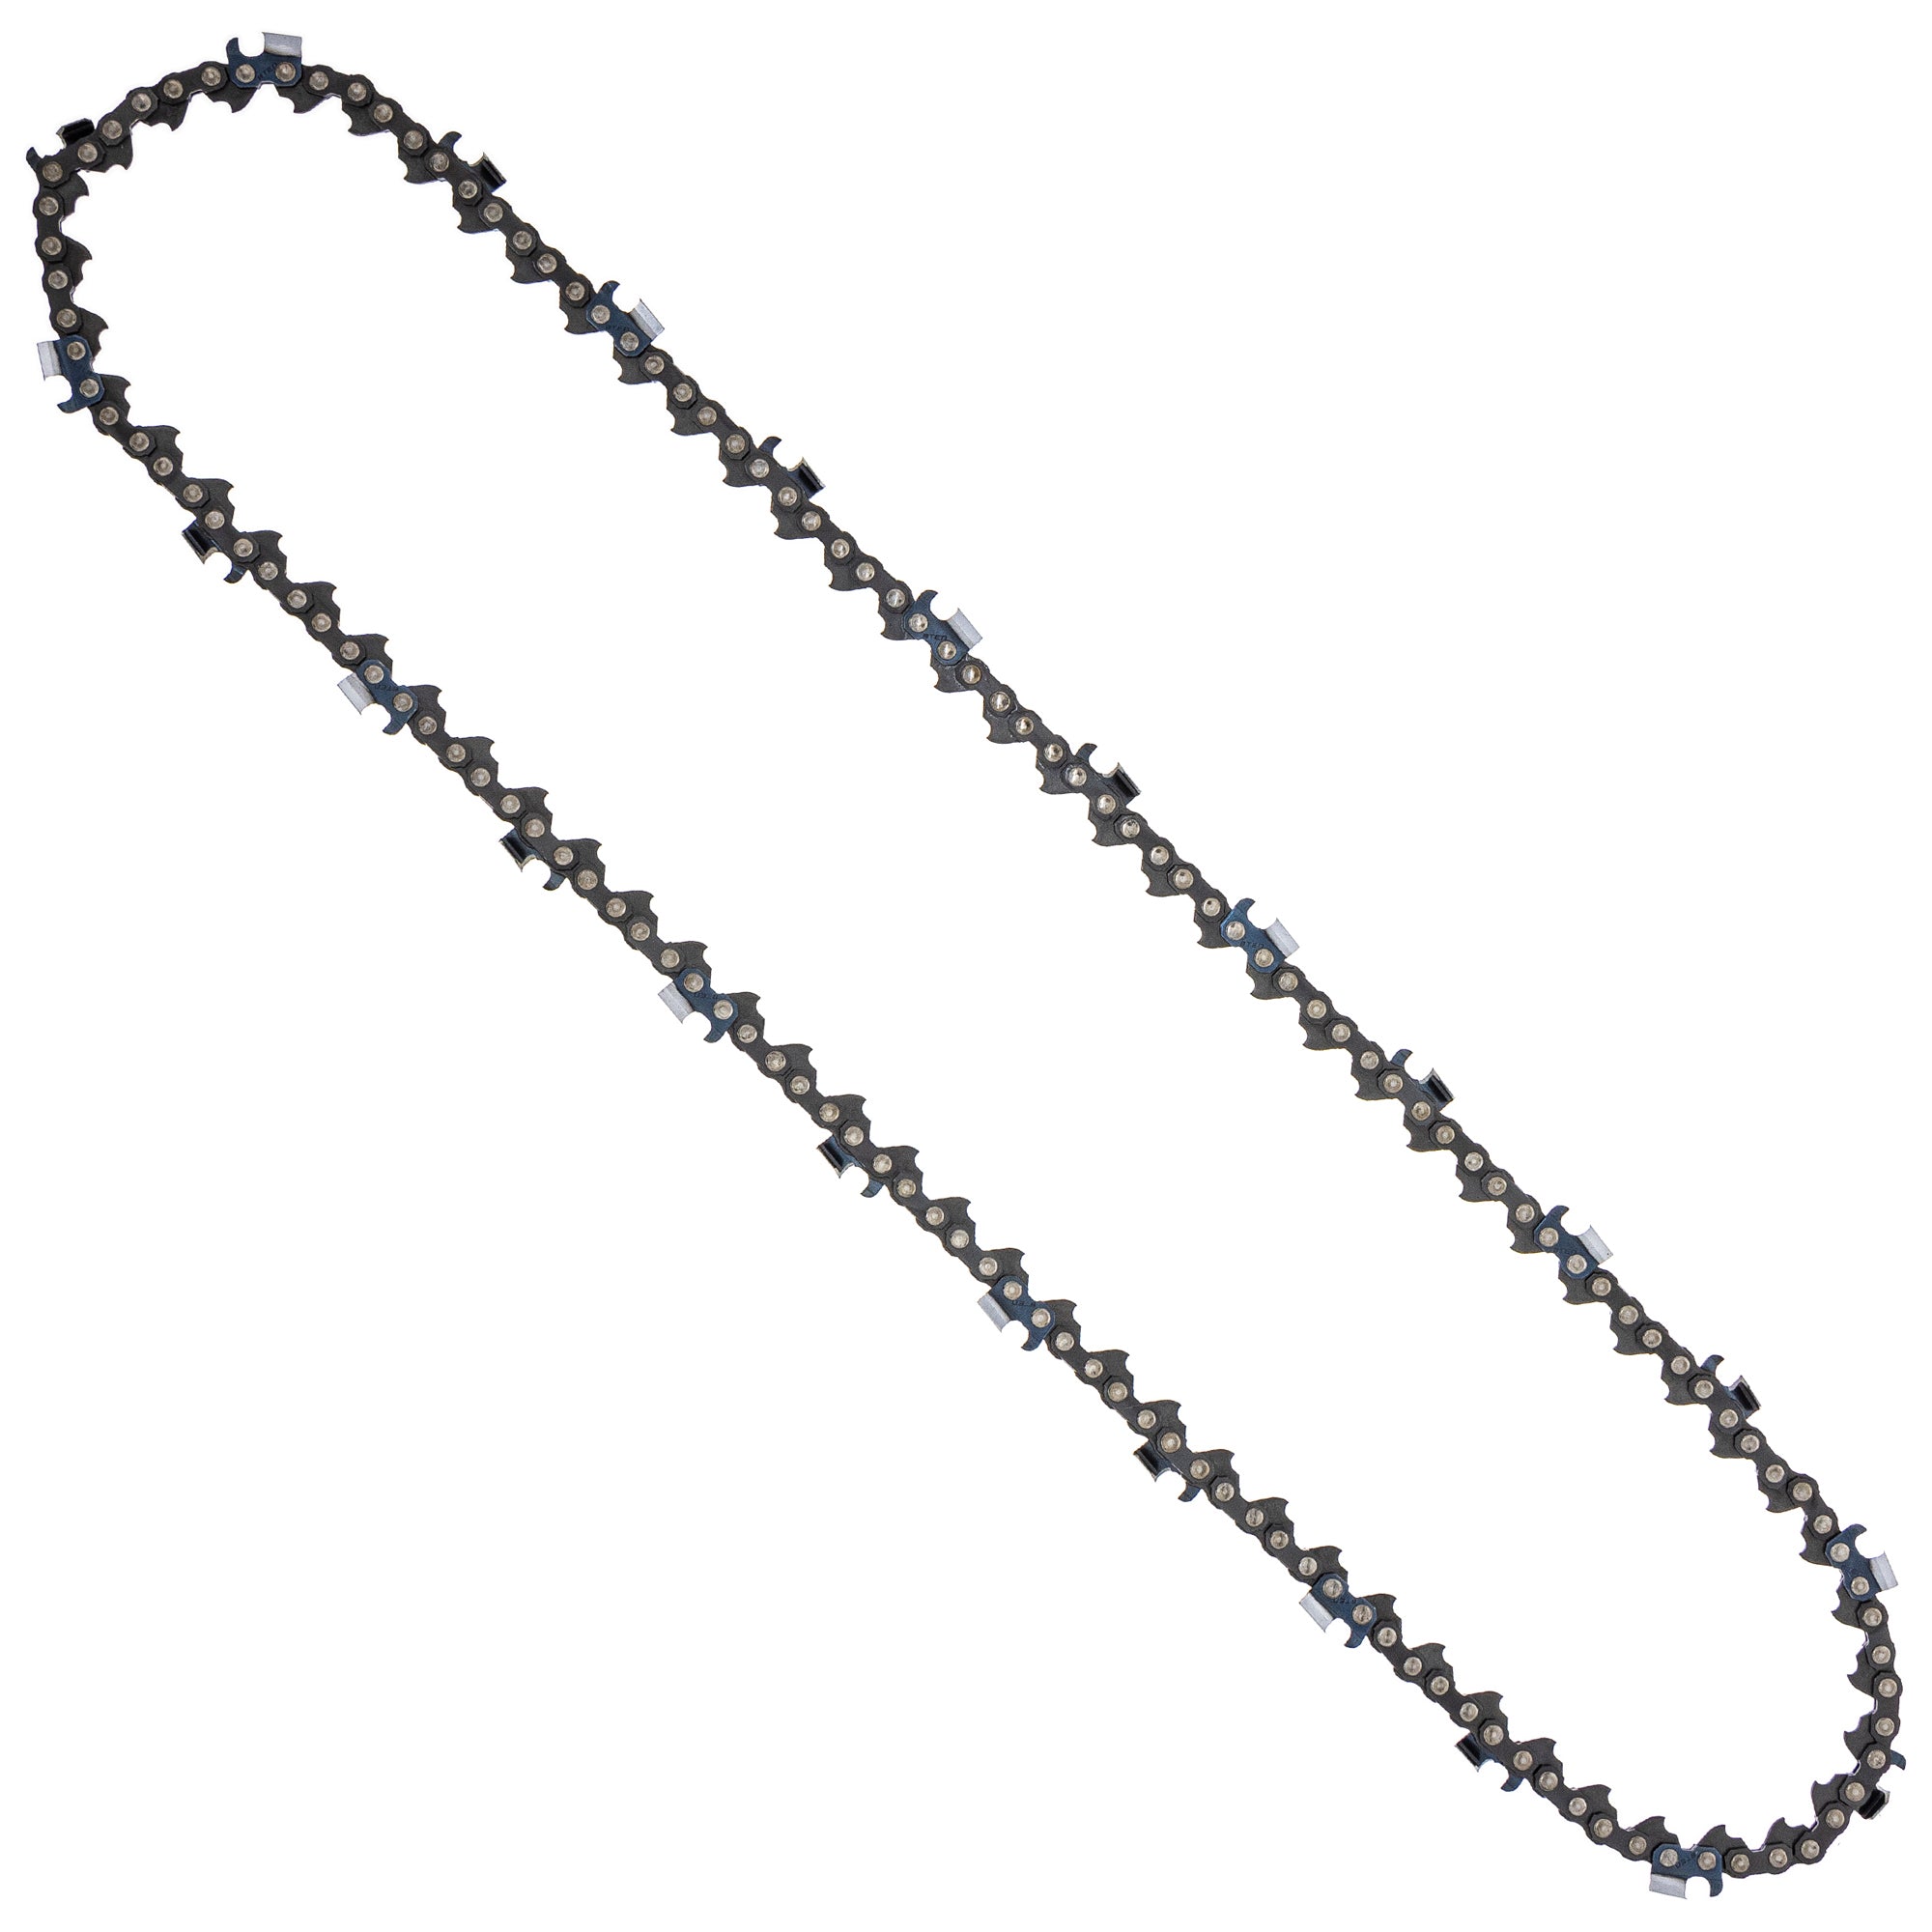 8TEN 810-CCC2290H Chain 3-Pack for zOTHER Oregon Husqvarna Poulan